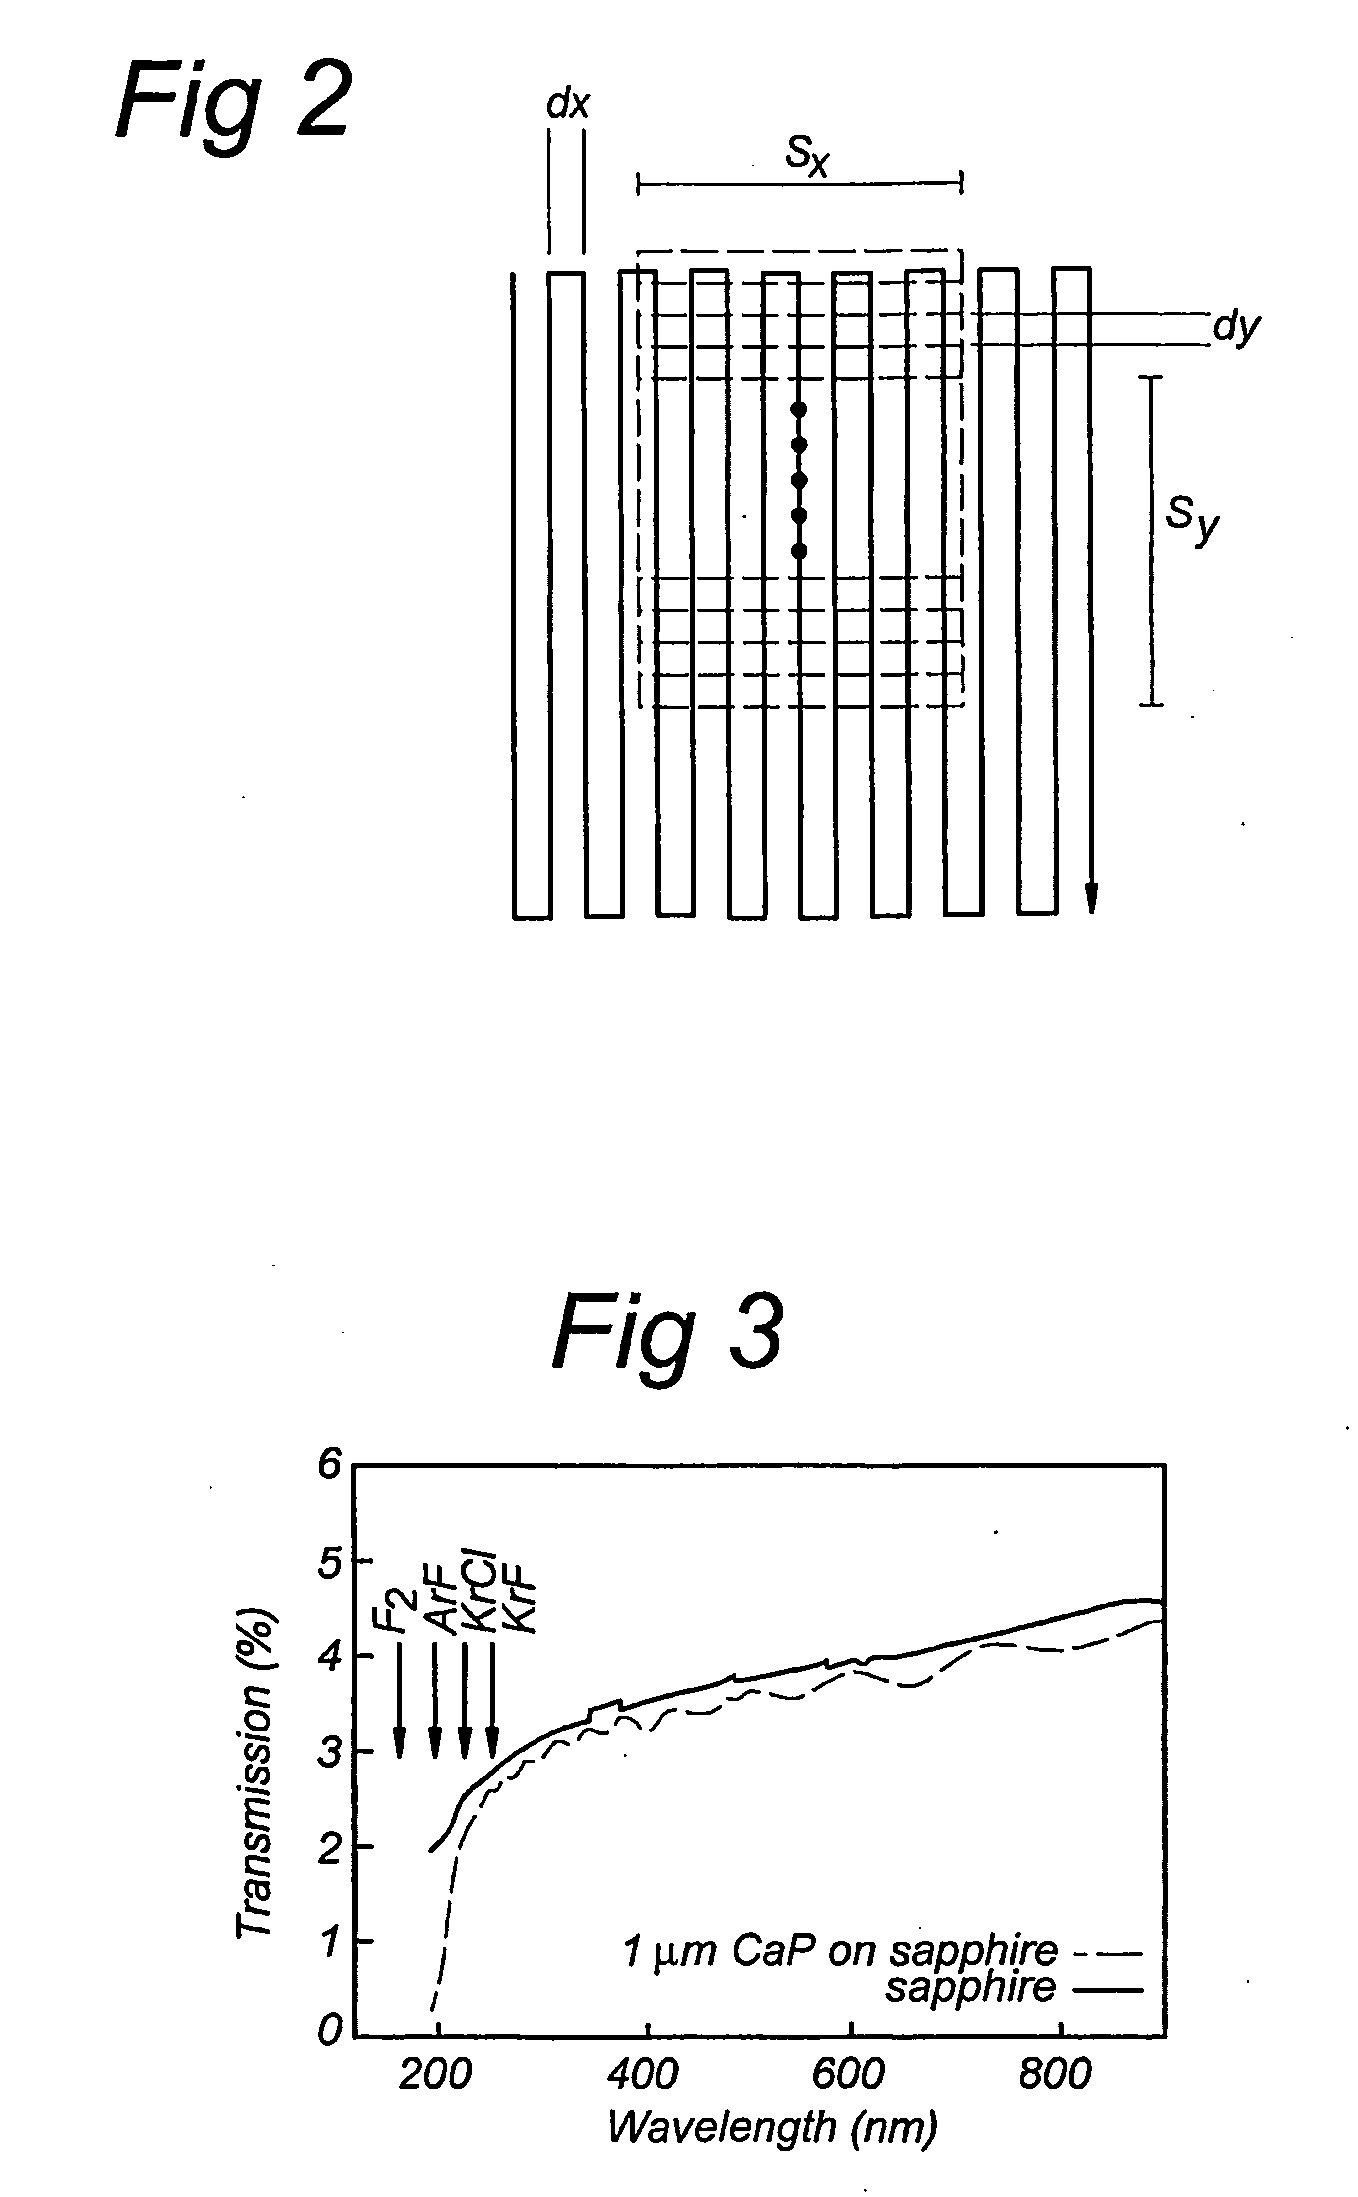 Method For Providing a Polymeric Implant With a Crystalline Calcium Phosphate Coating